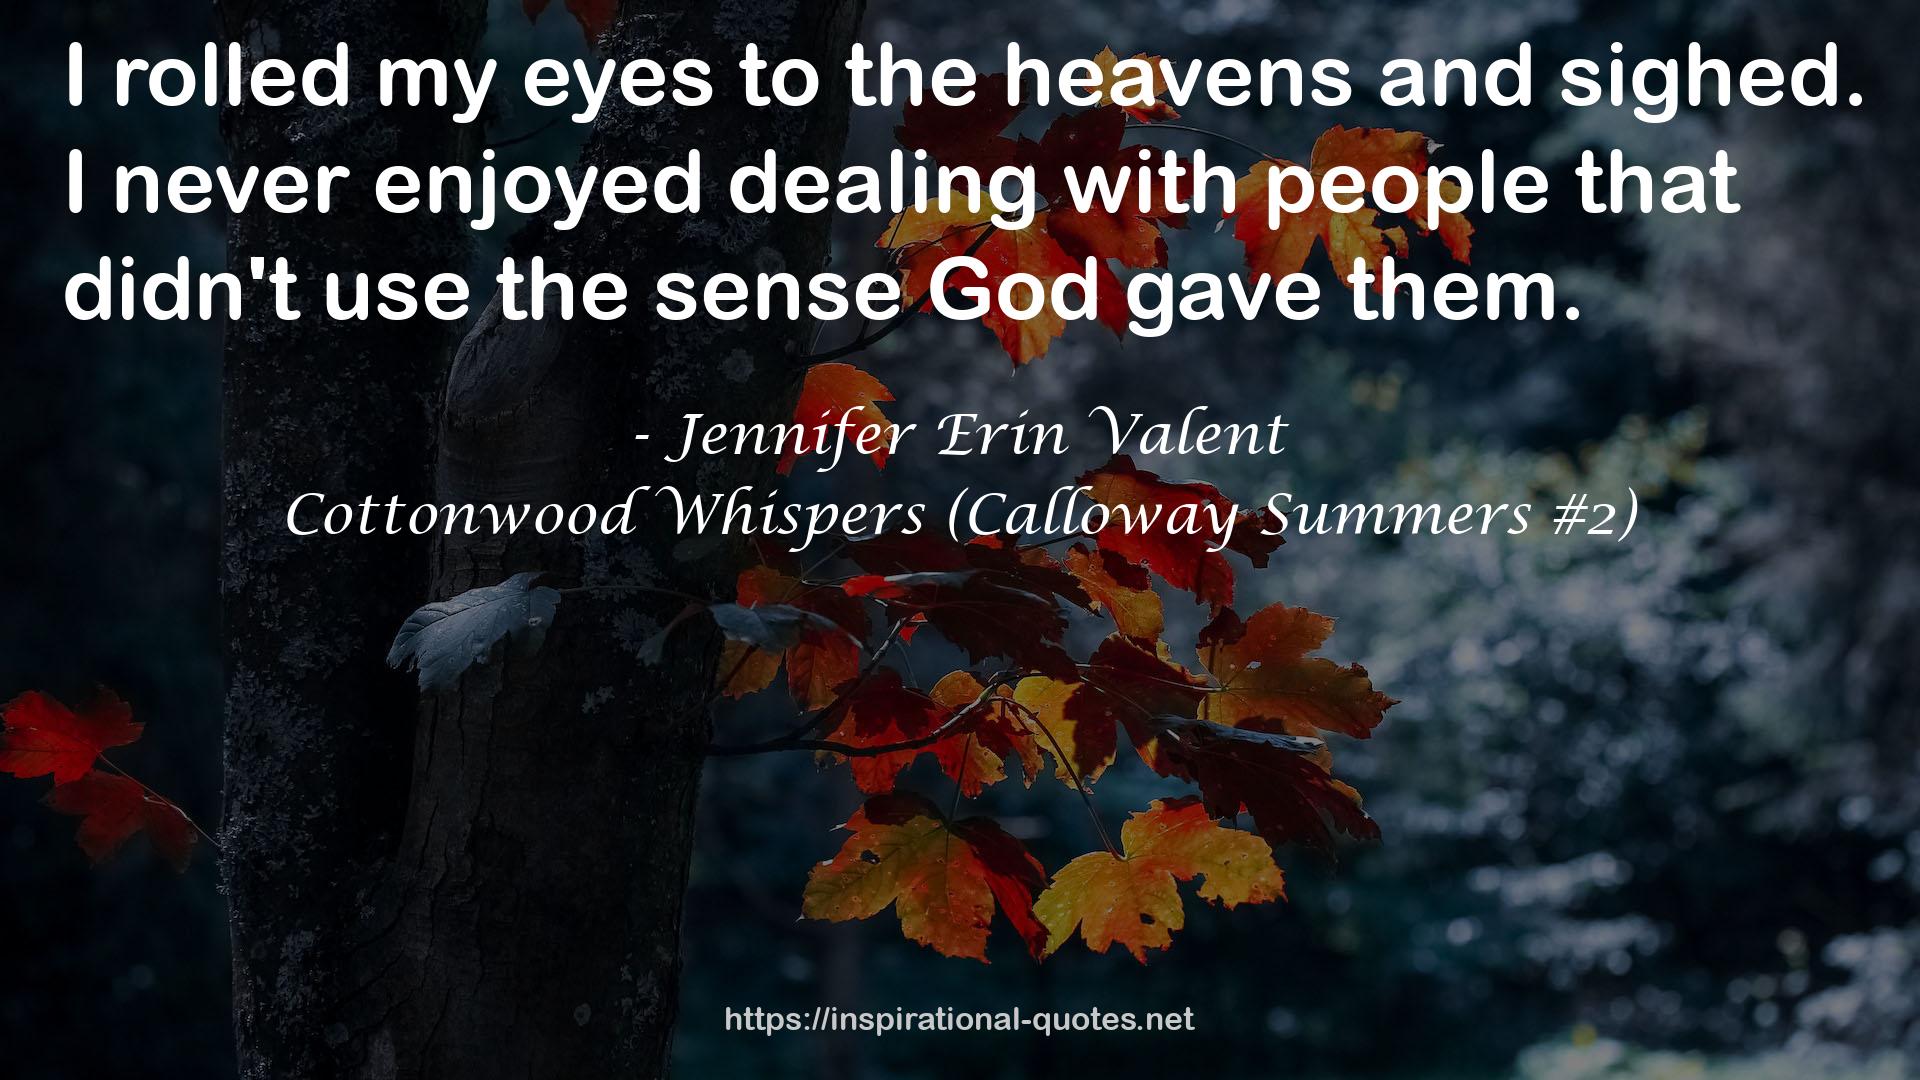 Cottonwood Whispers (Calloway Summers #2) QUOTES